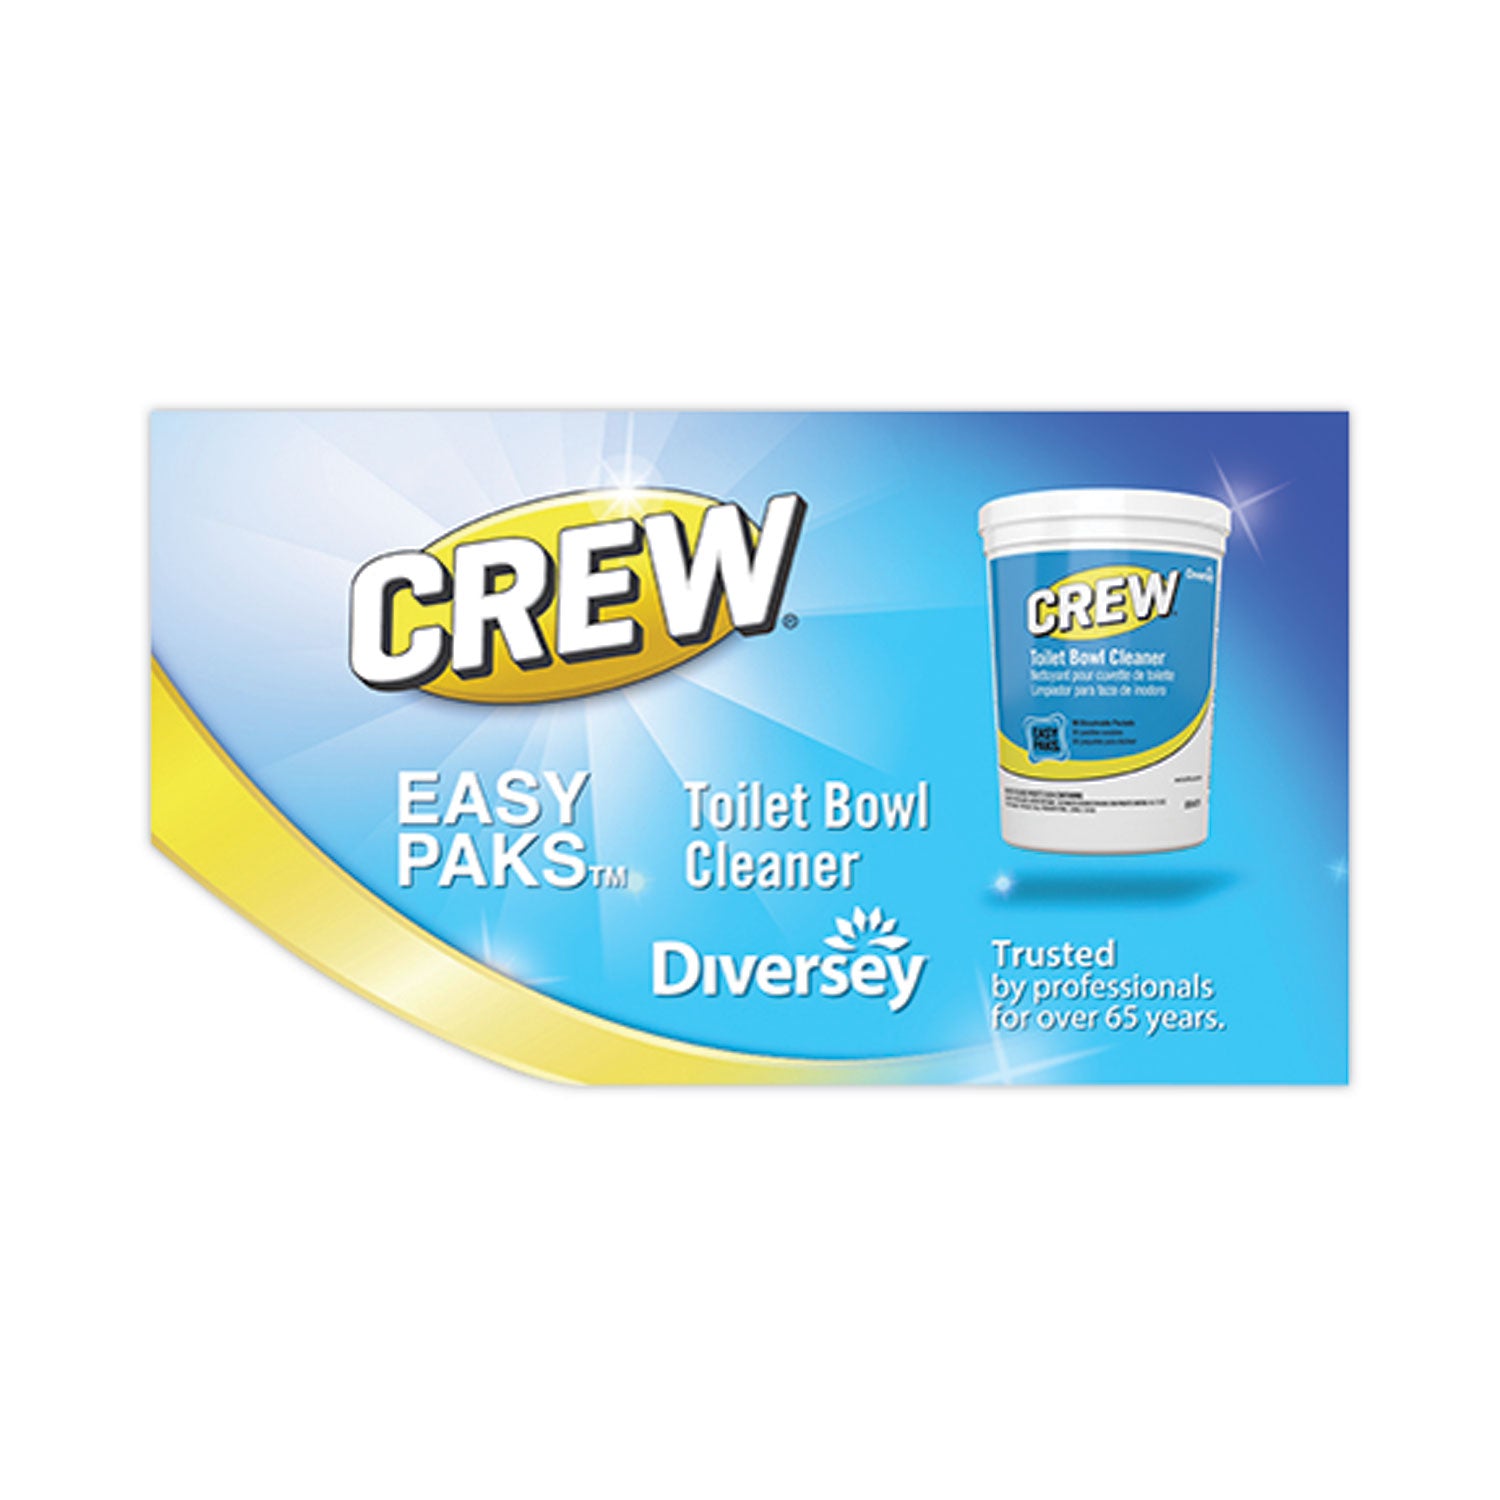 crew-easy-paks-toilet-bowl-cleaner-fresh-floral-scent-05-oz-packet-90-packets-tub-2-tubs-carton_dvocbd540731 - 6